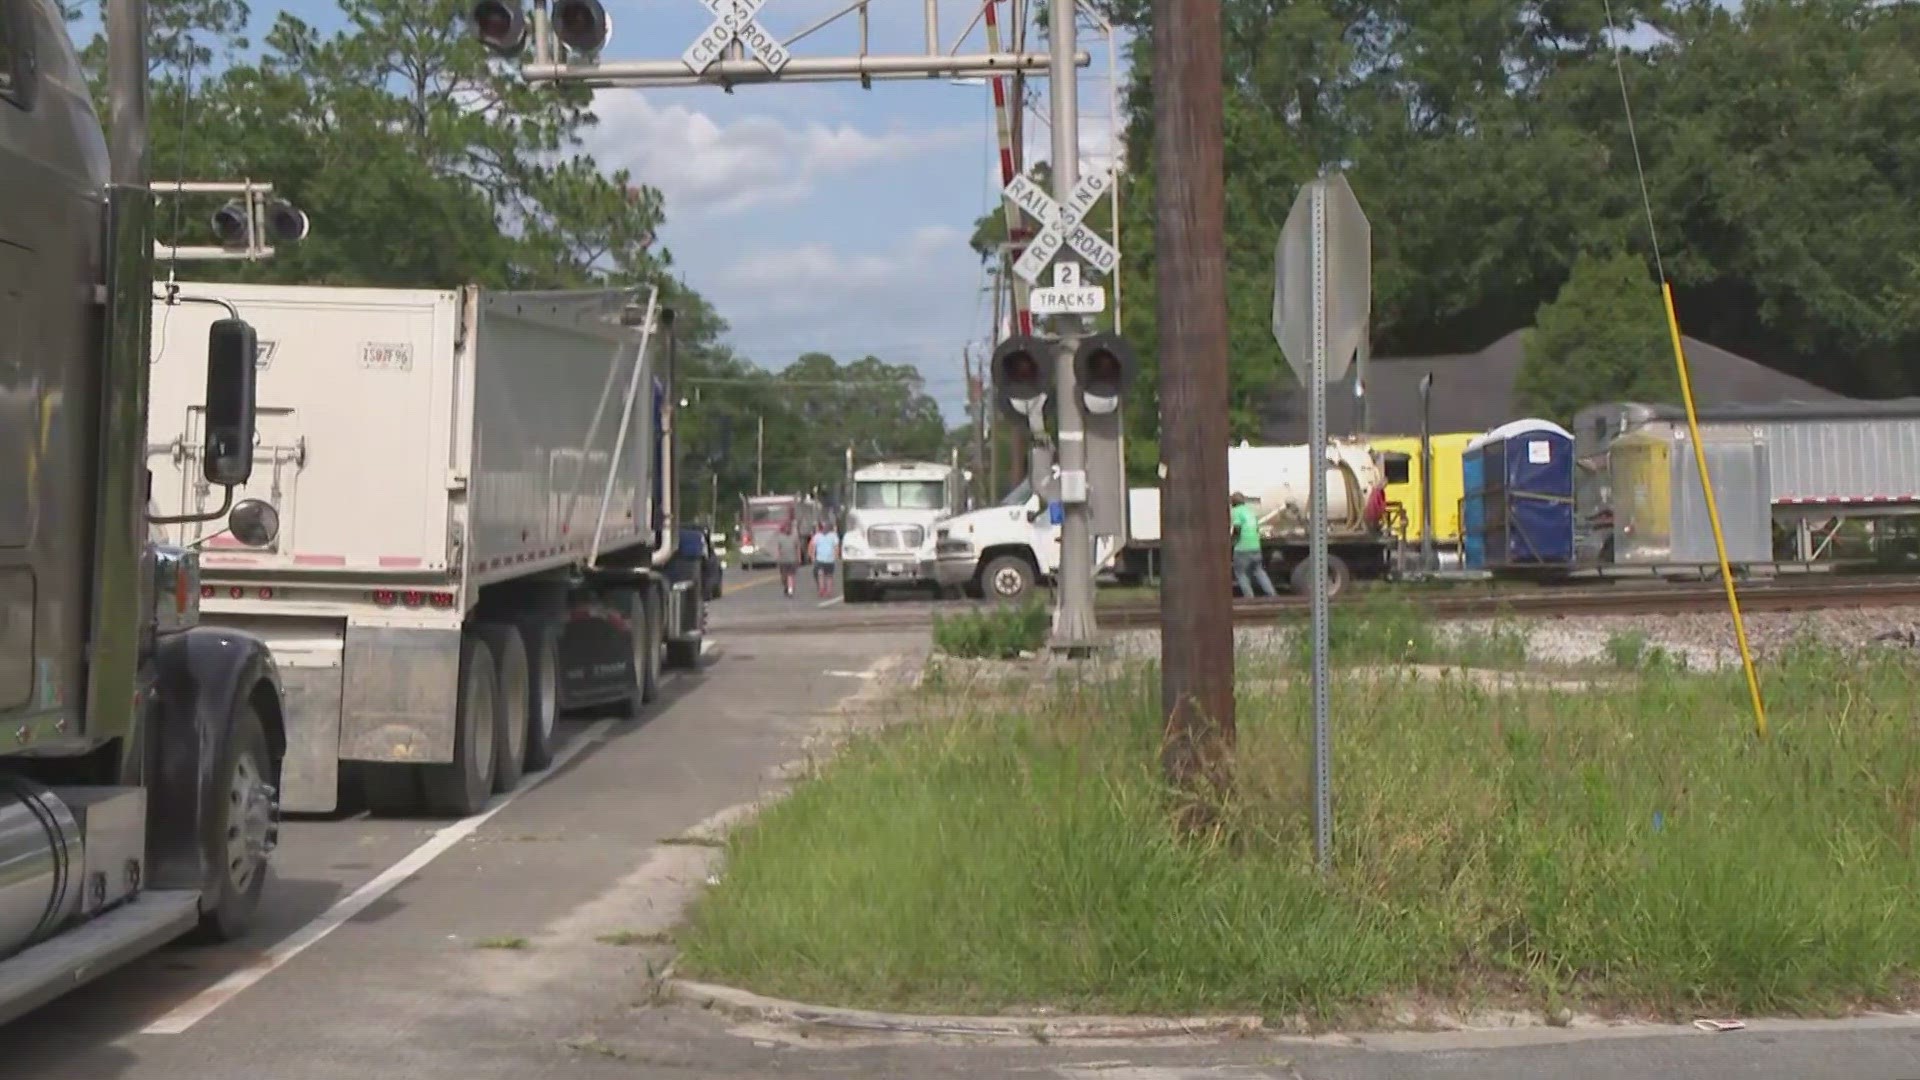 According to Ware County Emergency Management, eight train cars carrying rocks turned over early Thursday morning.